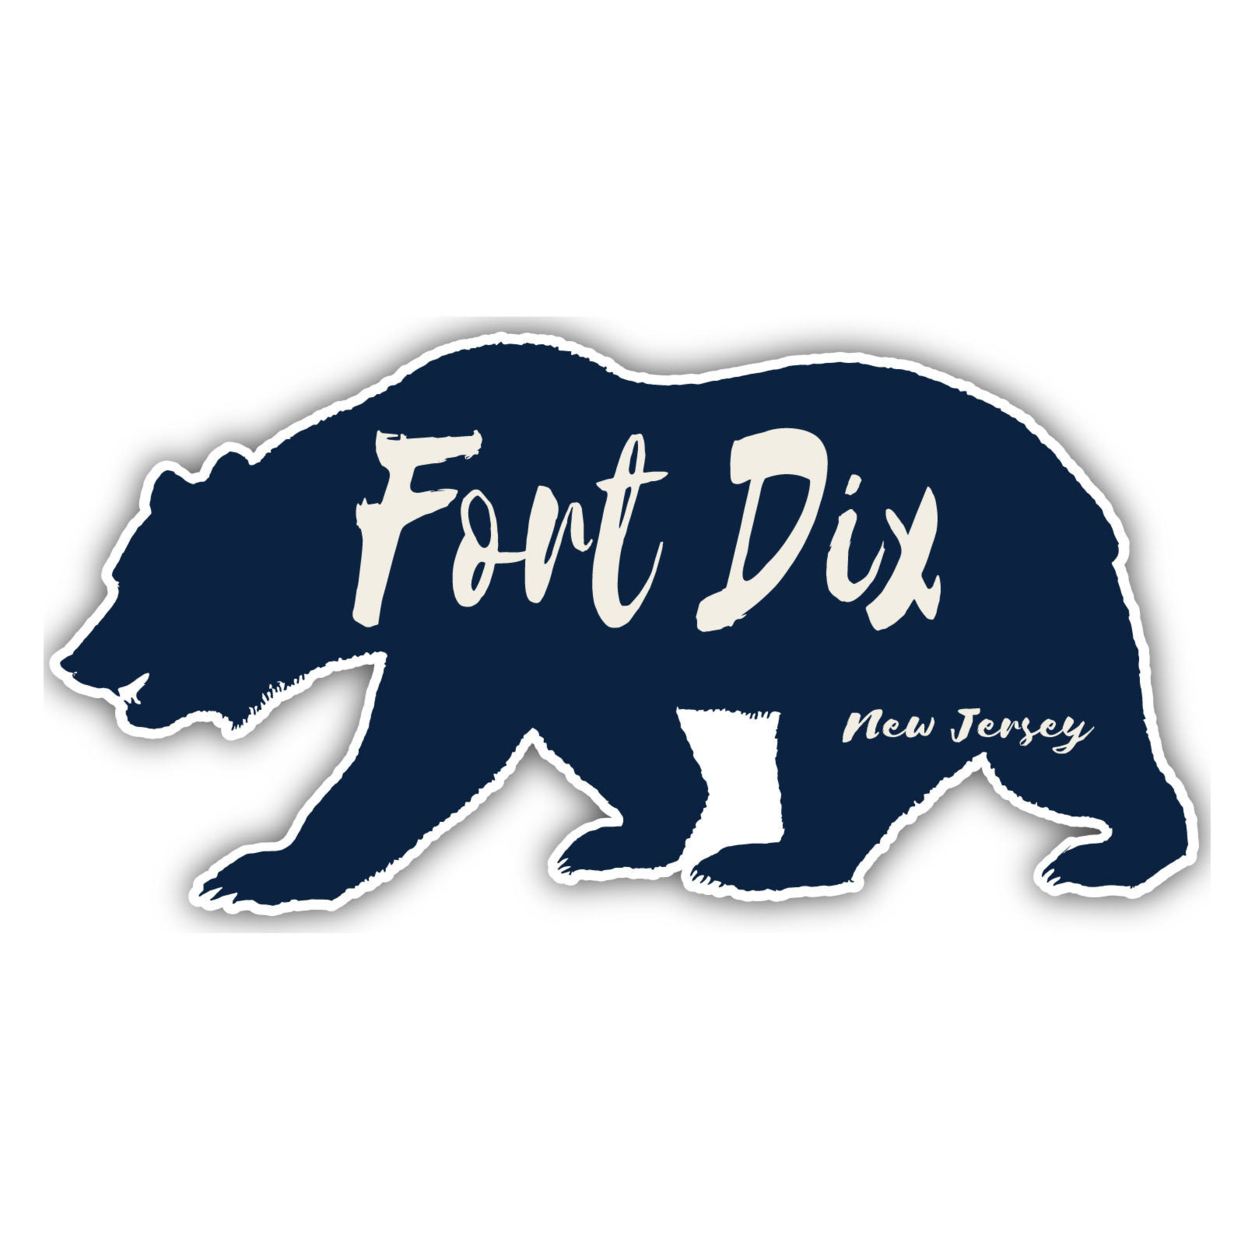 Fort Dix New Jersey Souvenir Decorative Stickers (Choose Theme And Size) - Single Unit, 12-Inch, Bear